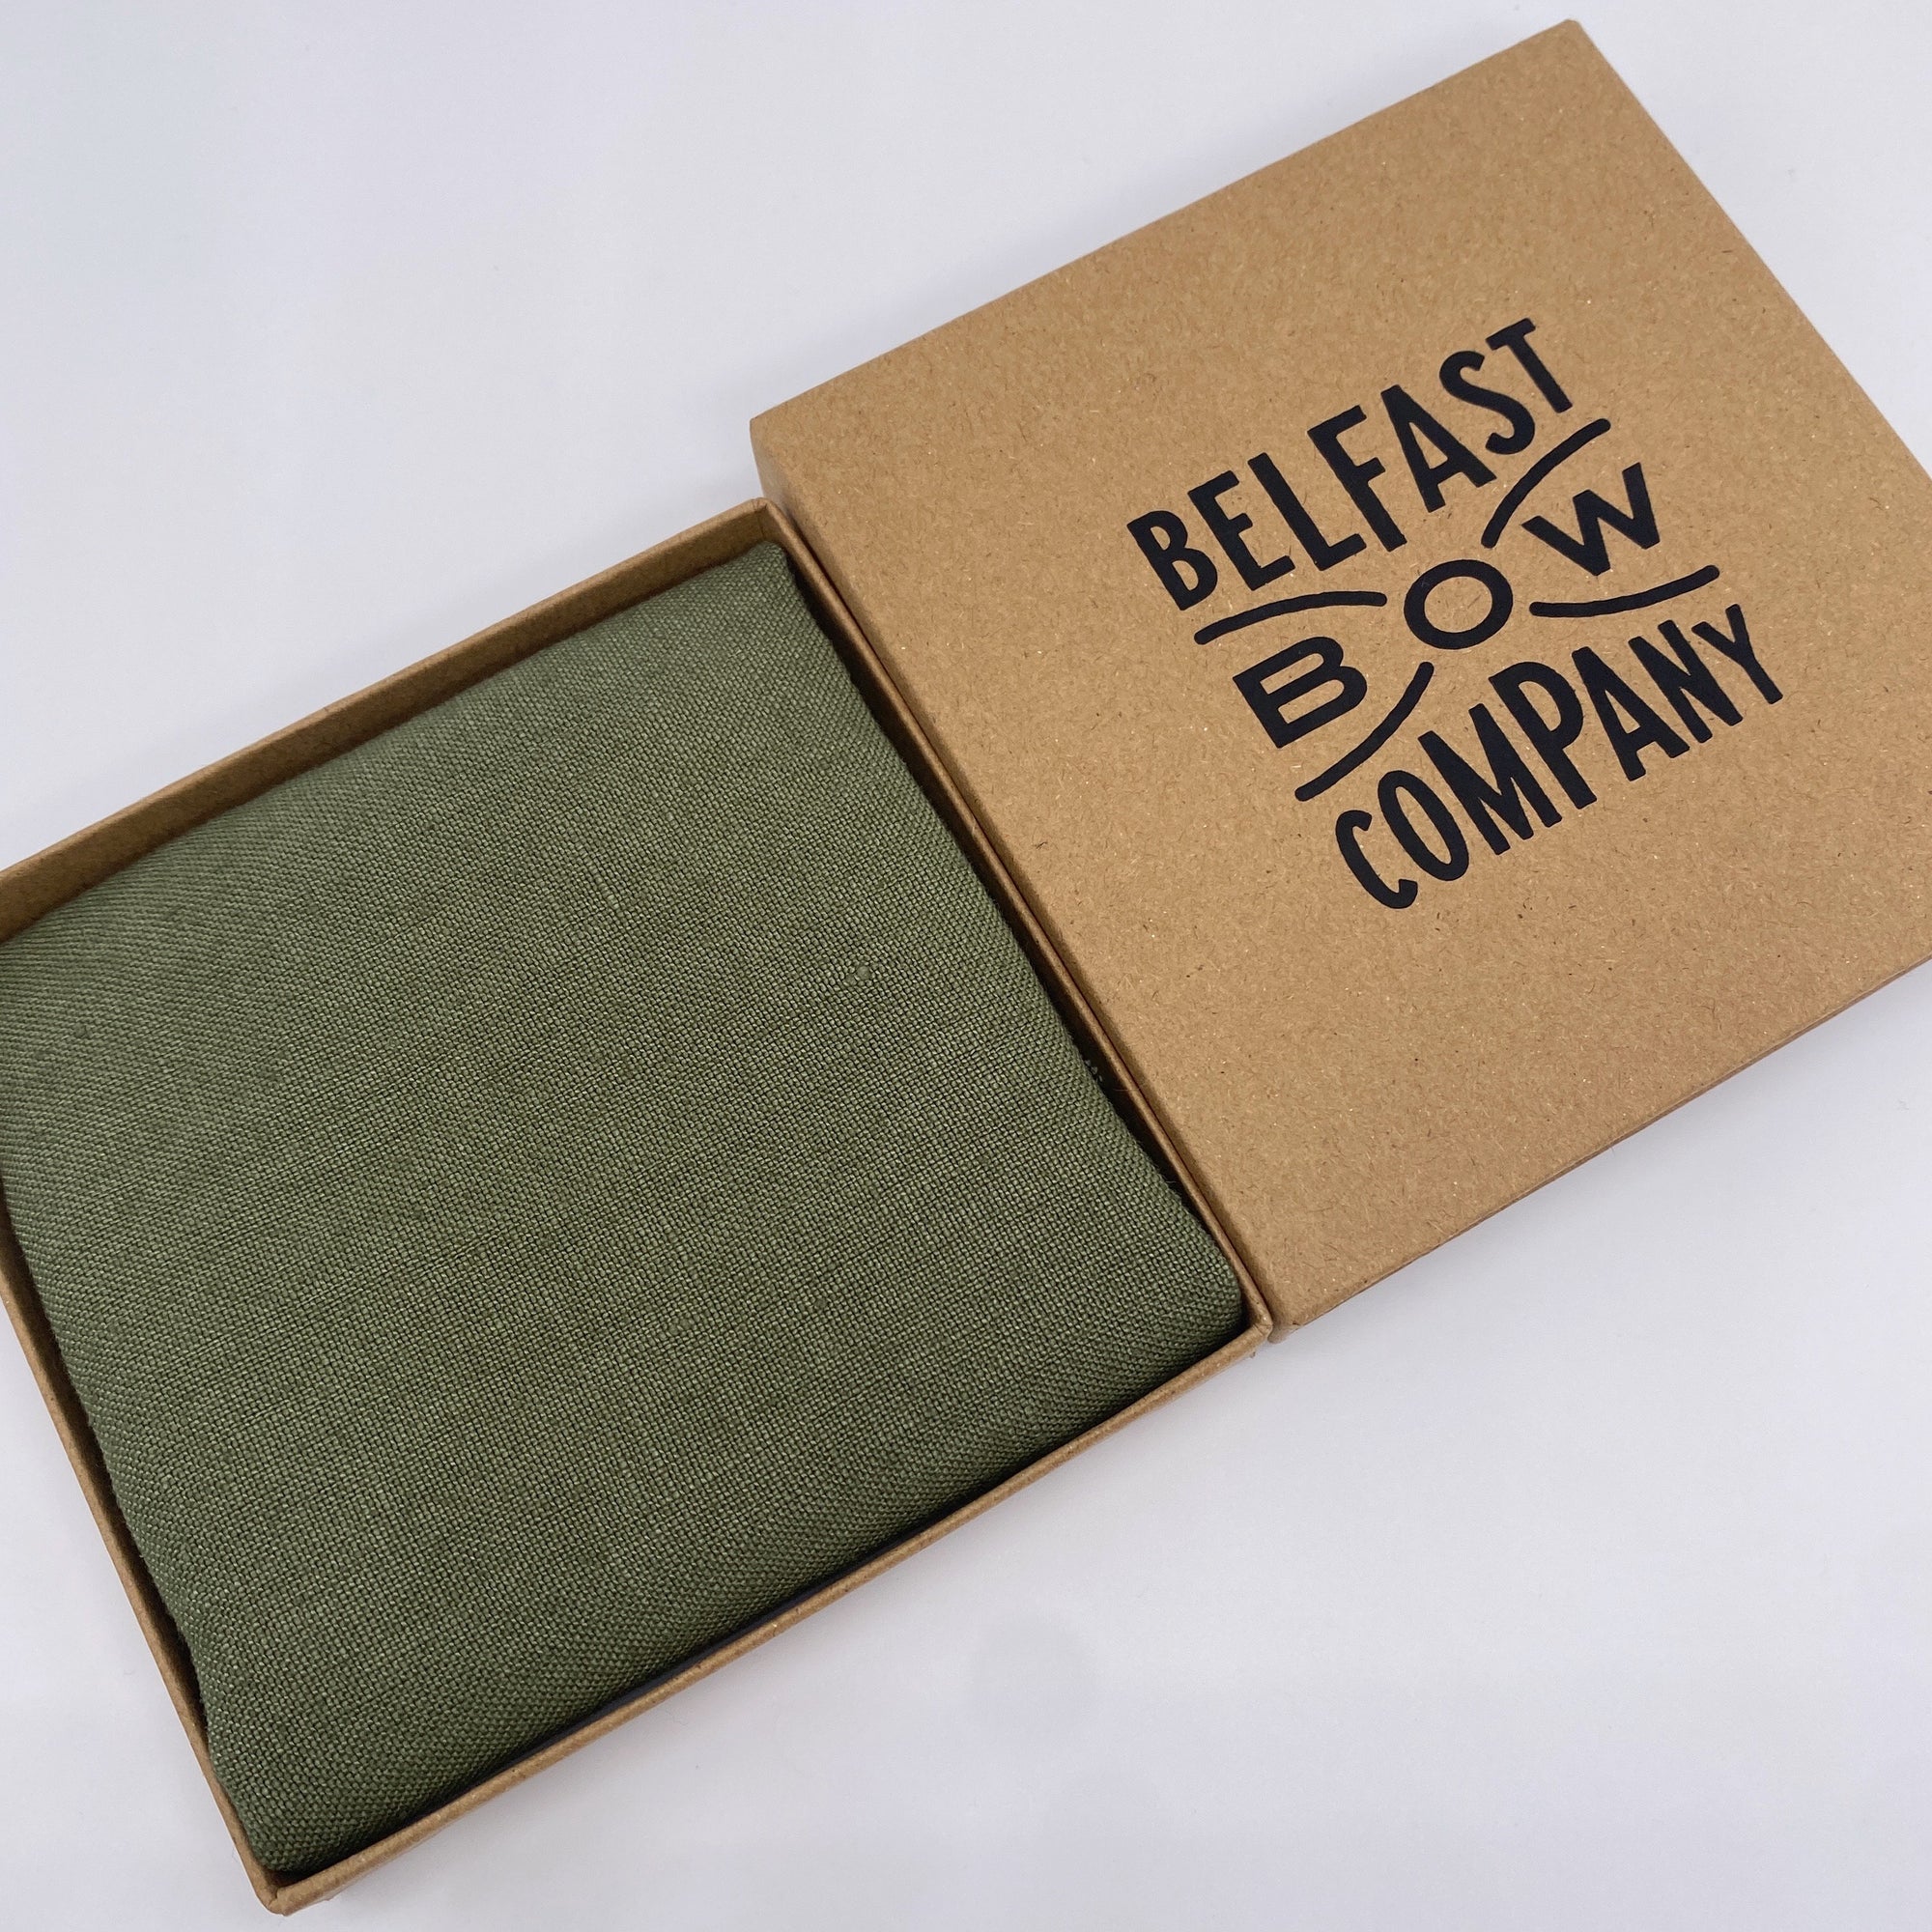 Irish Linen Pocket Square in Olive Green by the Belfast Bow Company